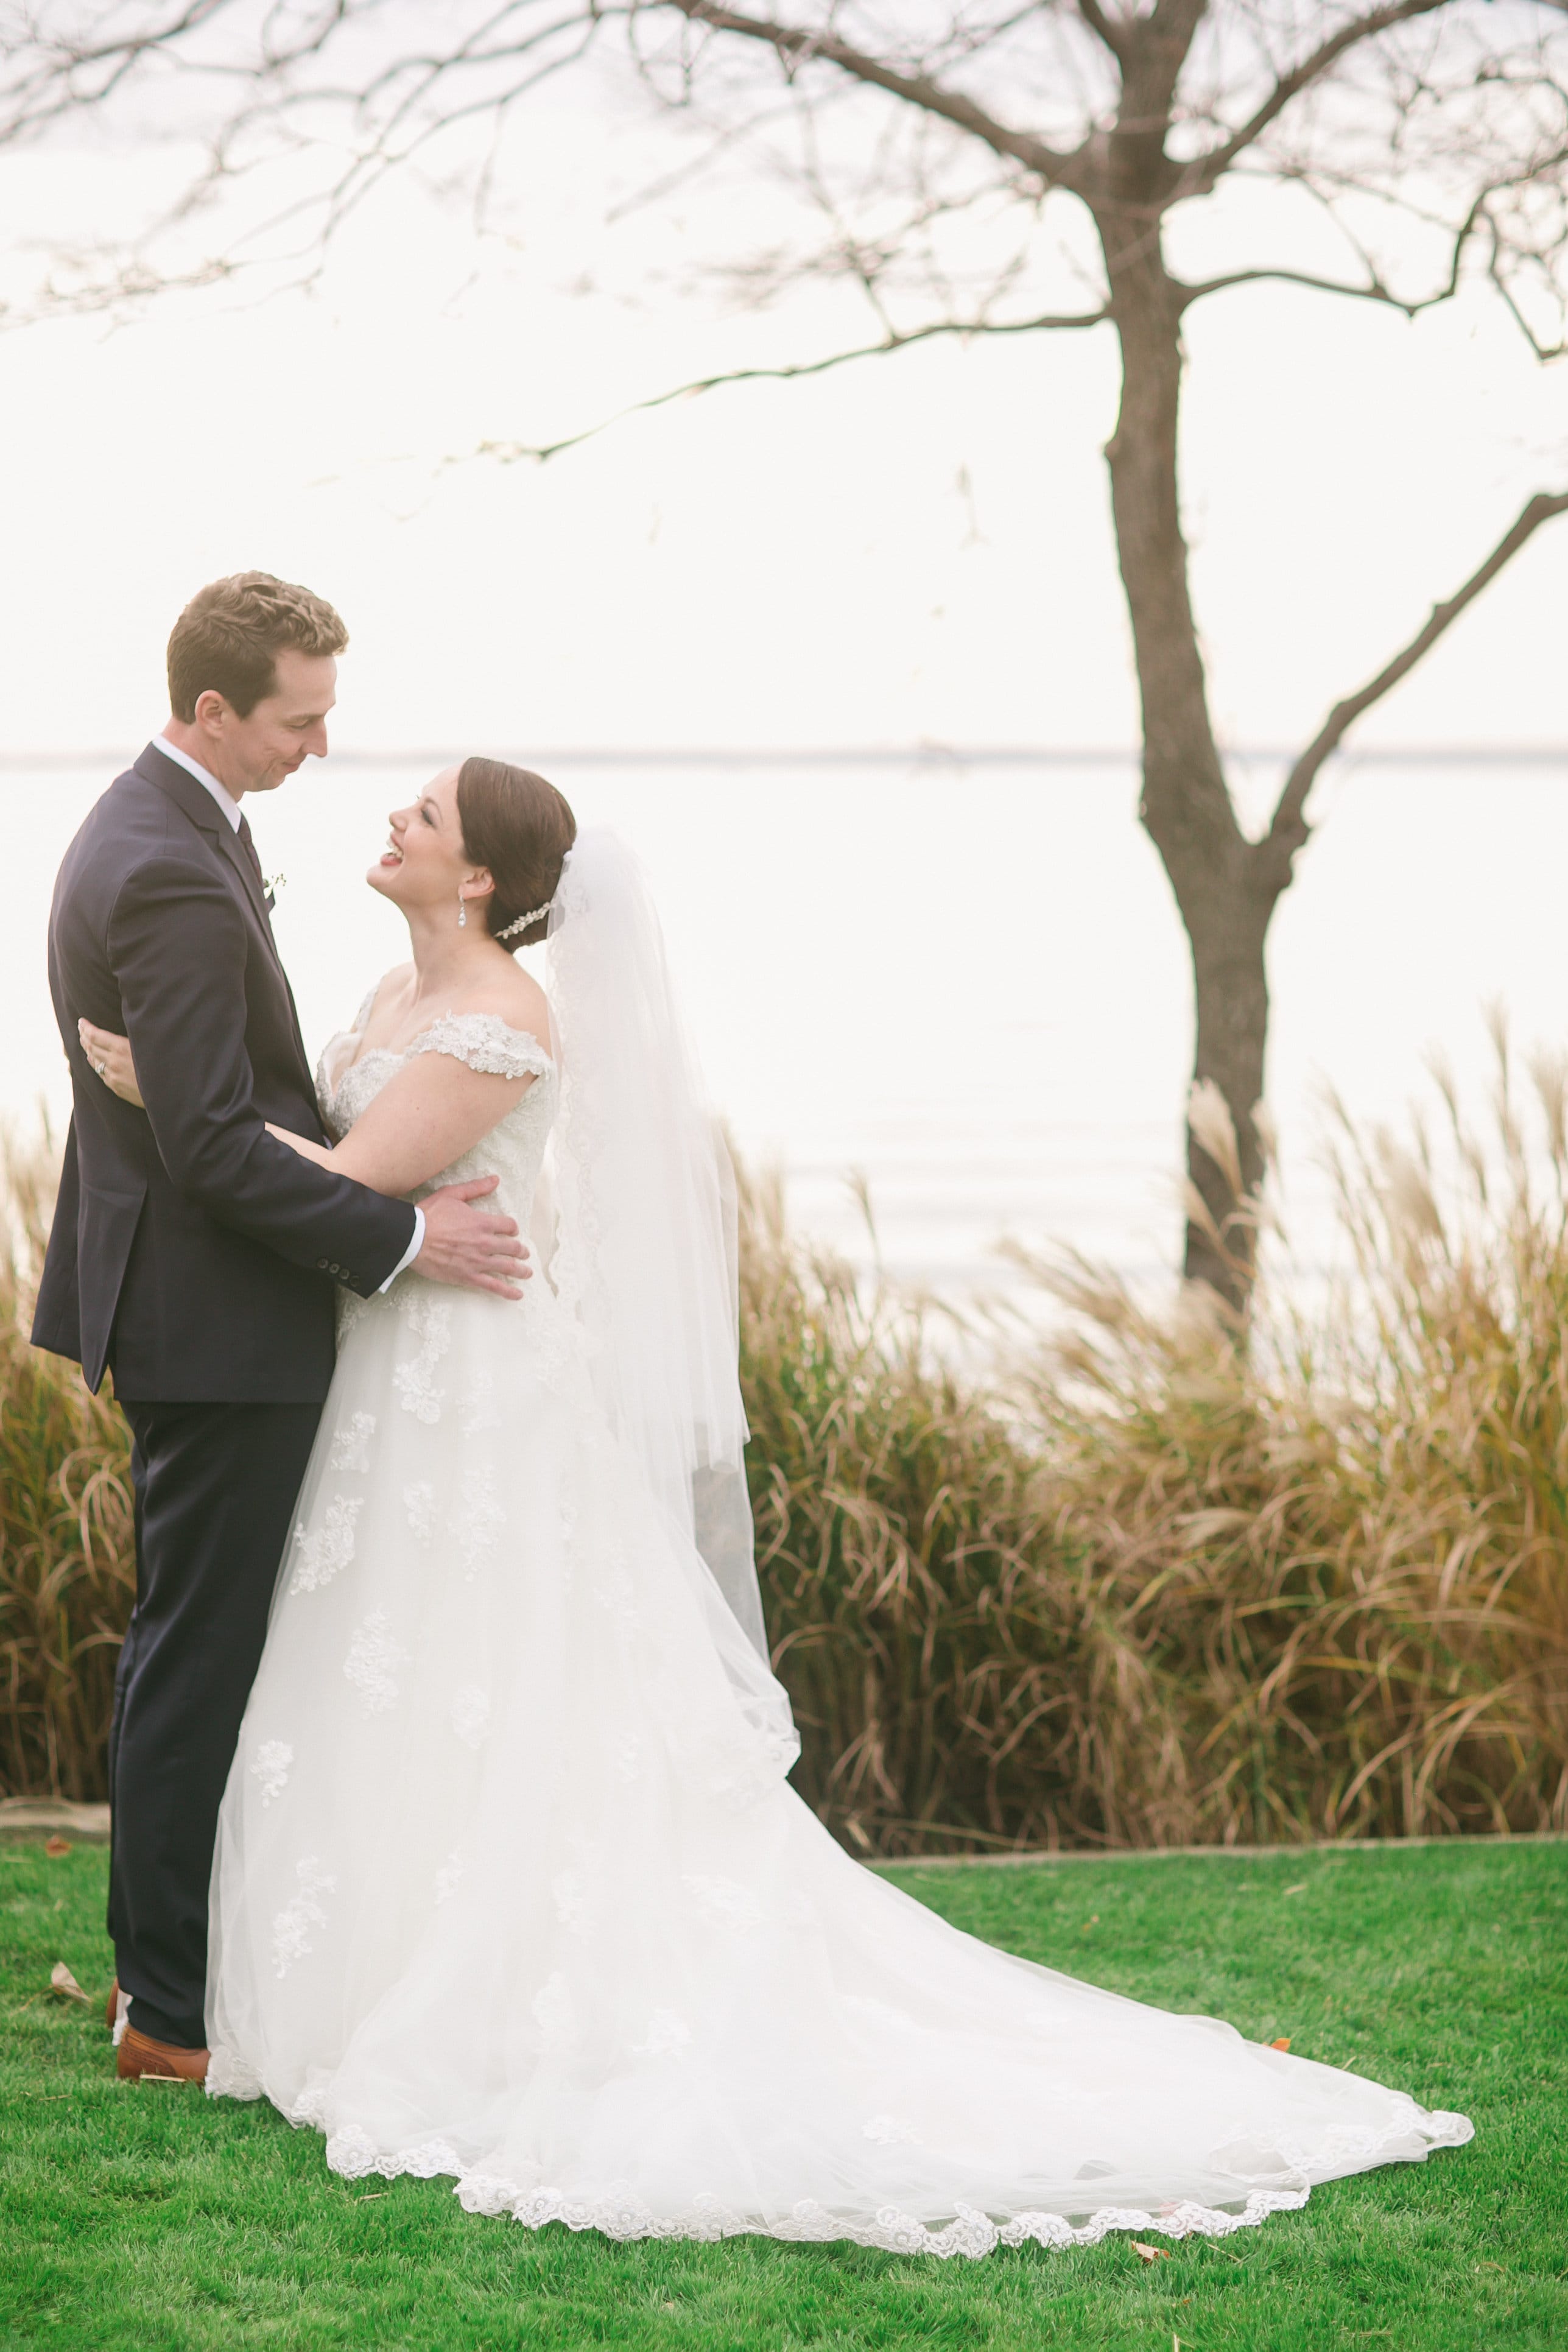 Online dating and college spirit-themed love story. Bride Lauren in Maggie Sottero gown Saffron.